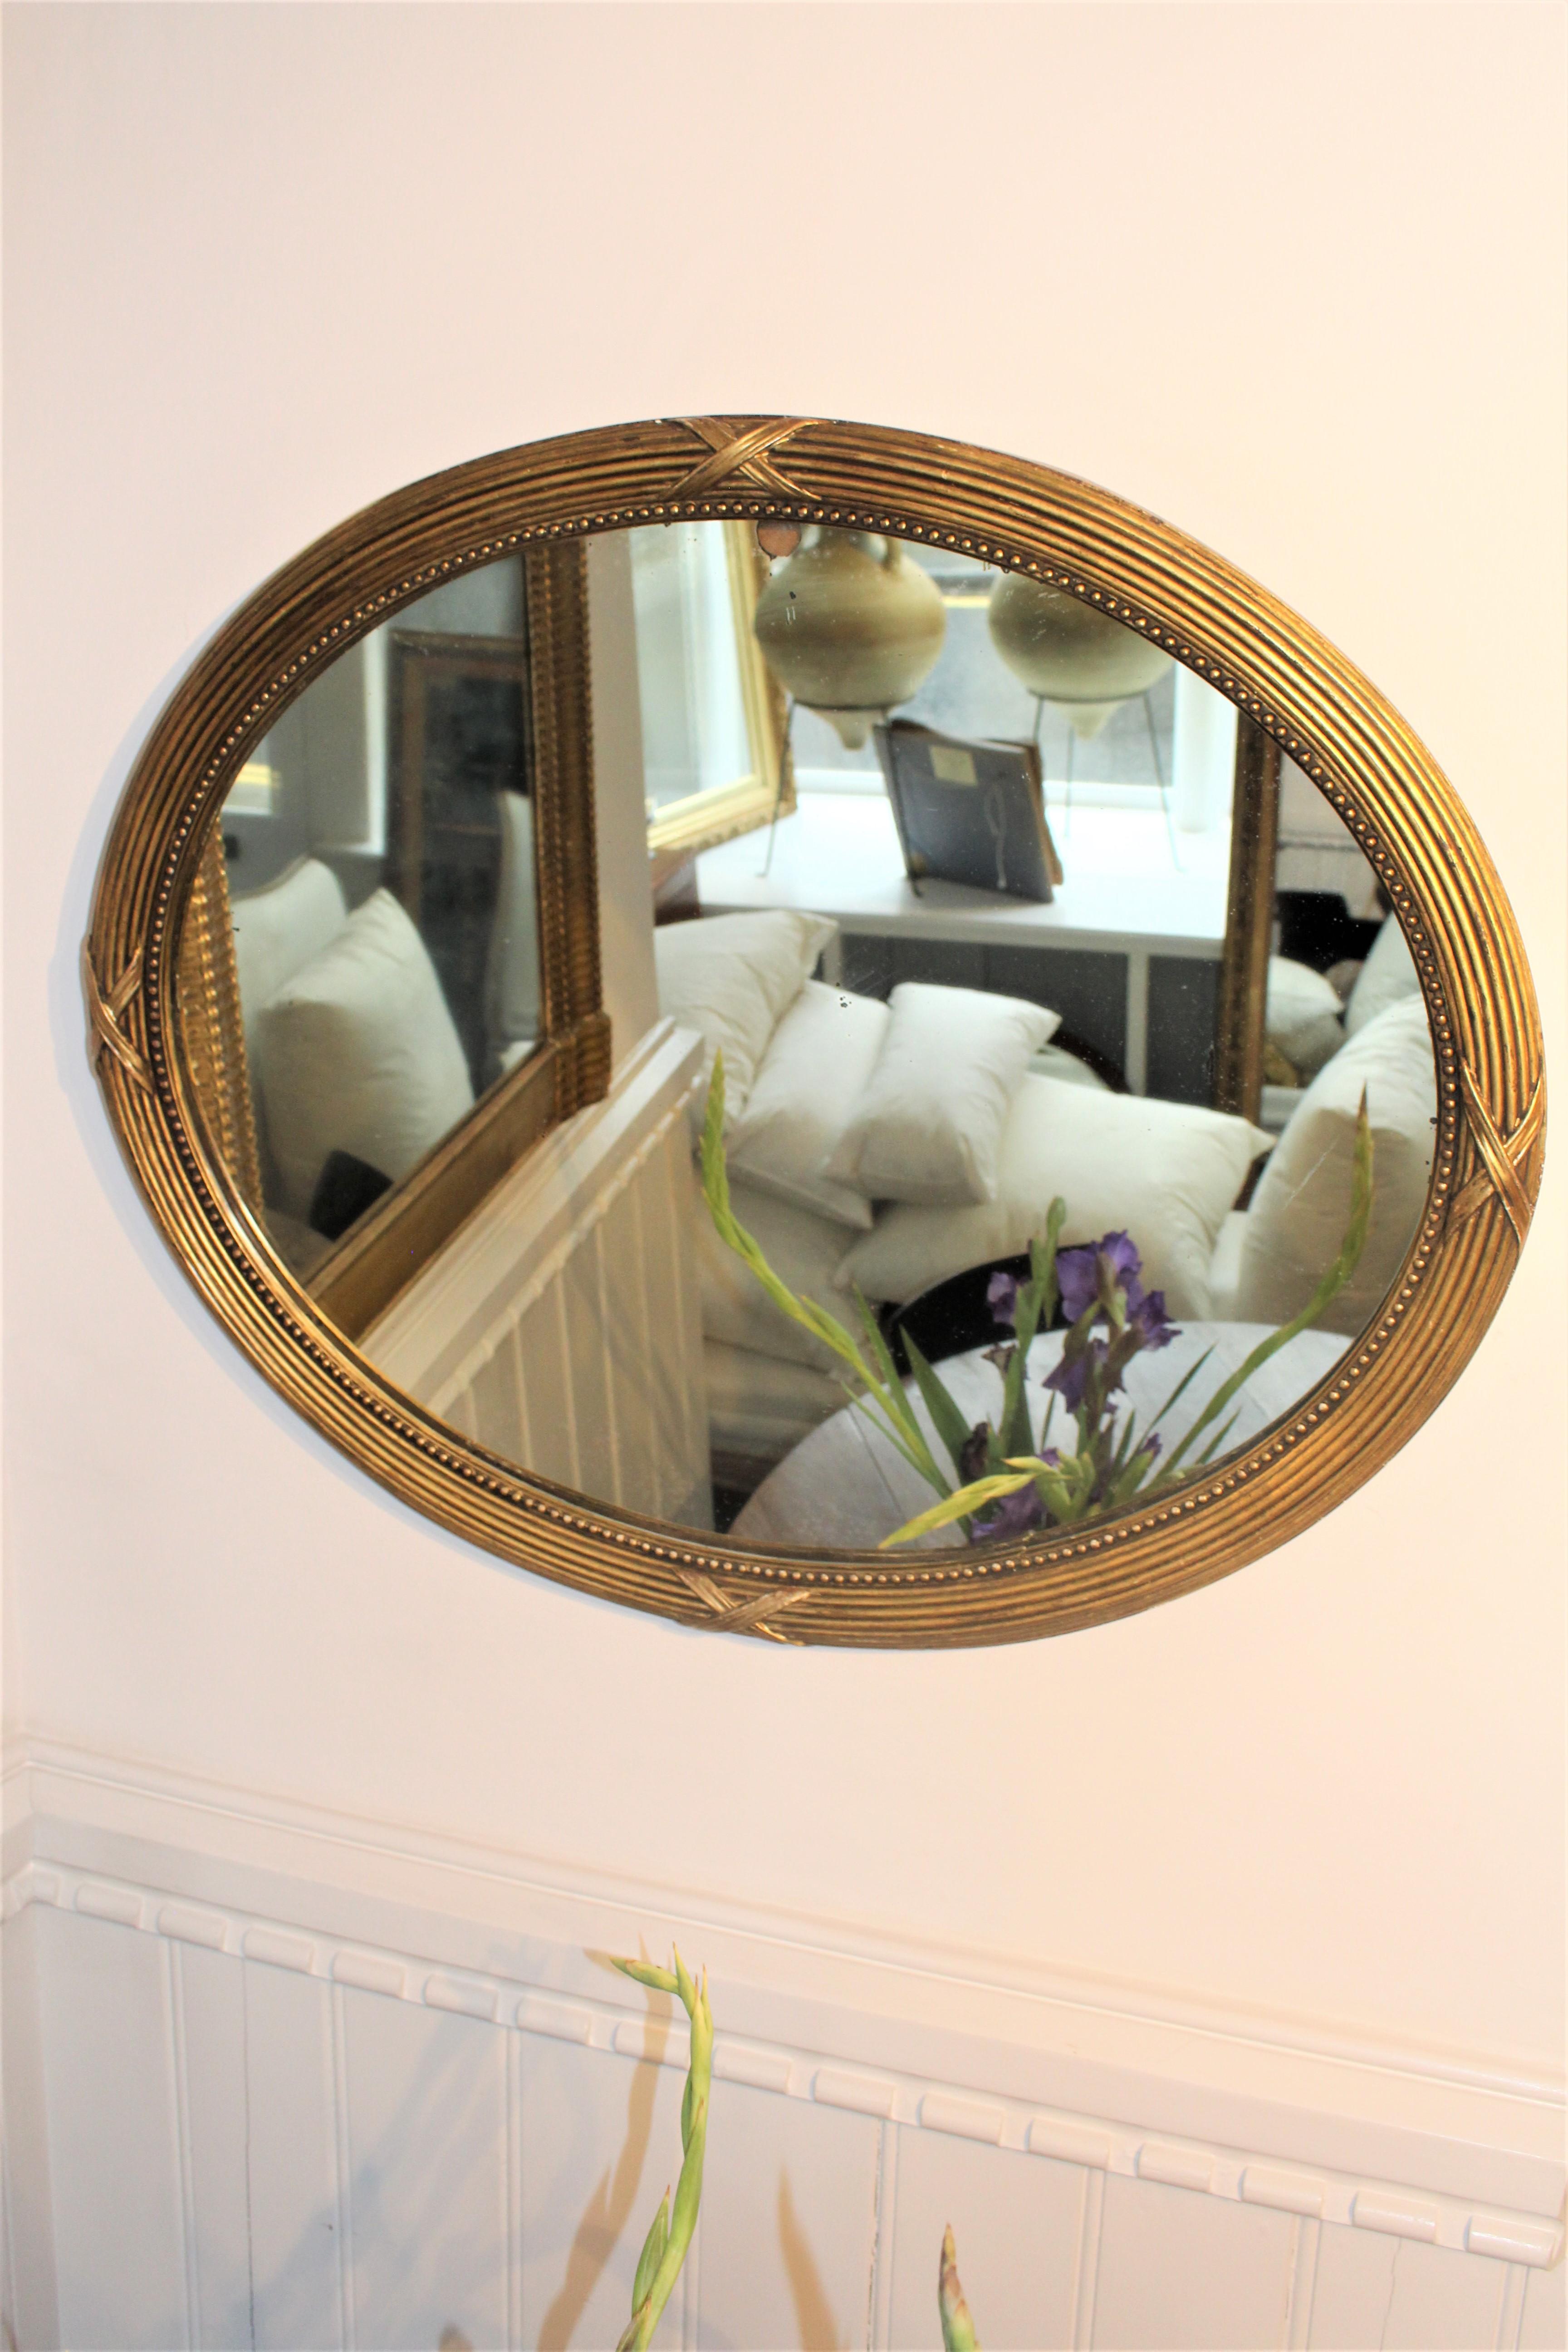 Oval French Art Deco gilt mirror with internal beading, original mercury glass plate and ribbon decorations,.
circa 1930s
Can be used portrait or landscape.

Condition:
The giltwood frame is in good condition with no beading missing. Just a few